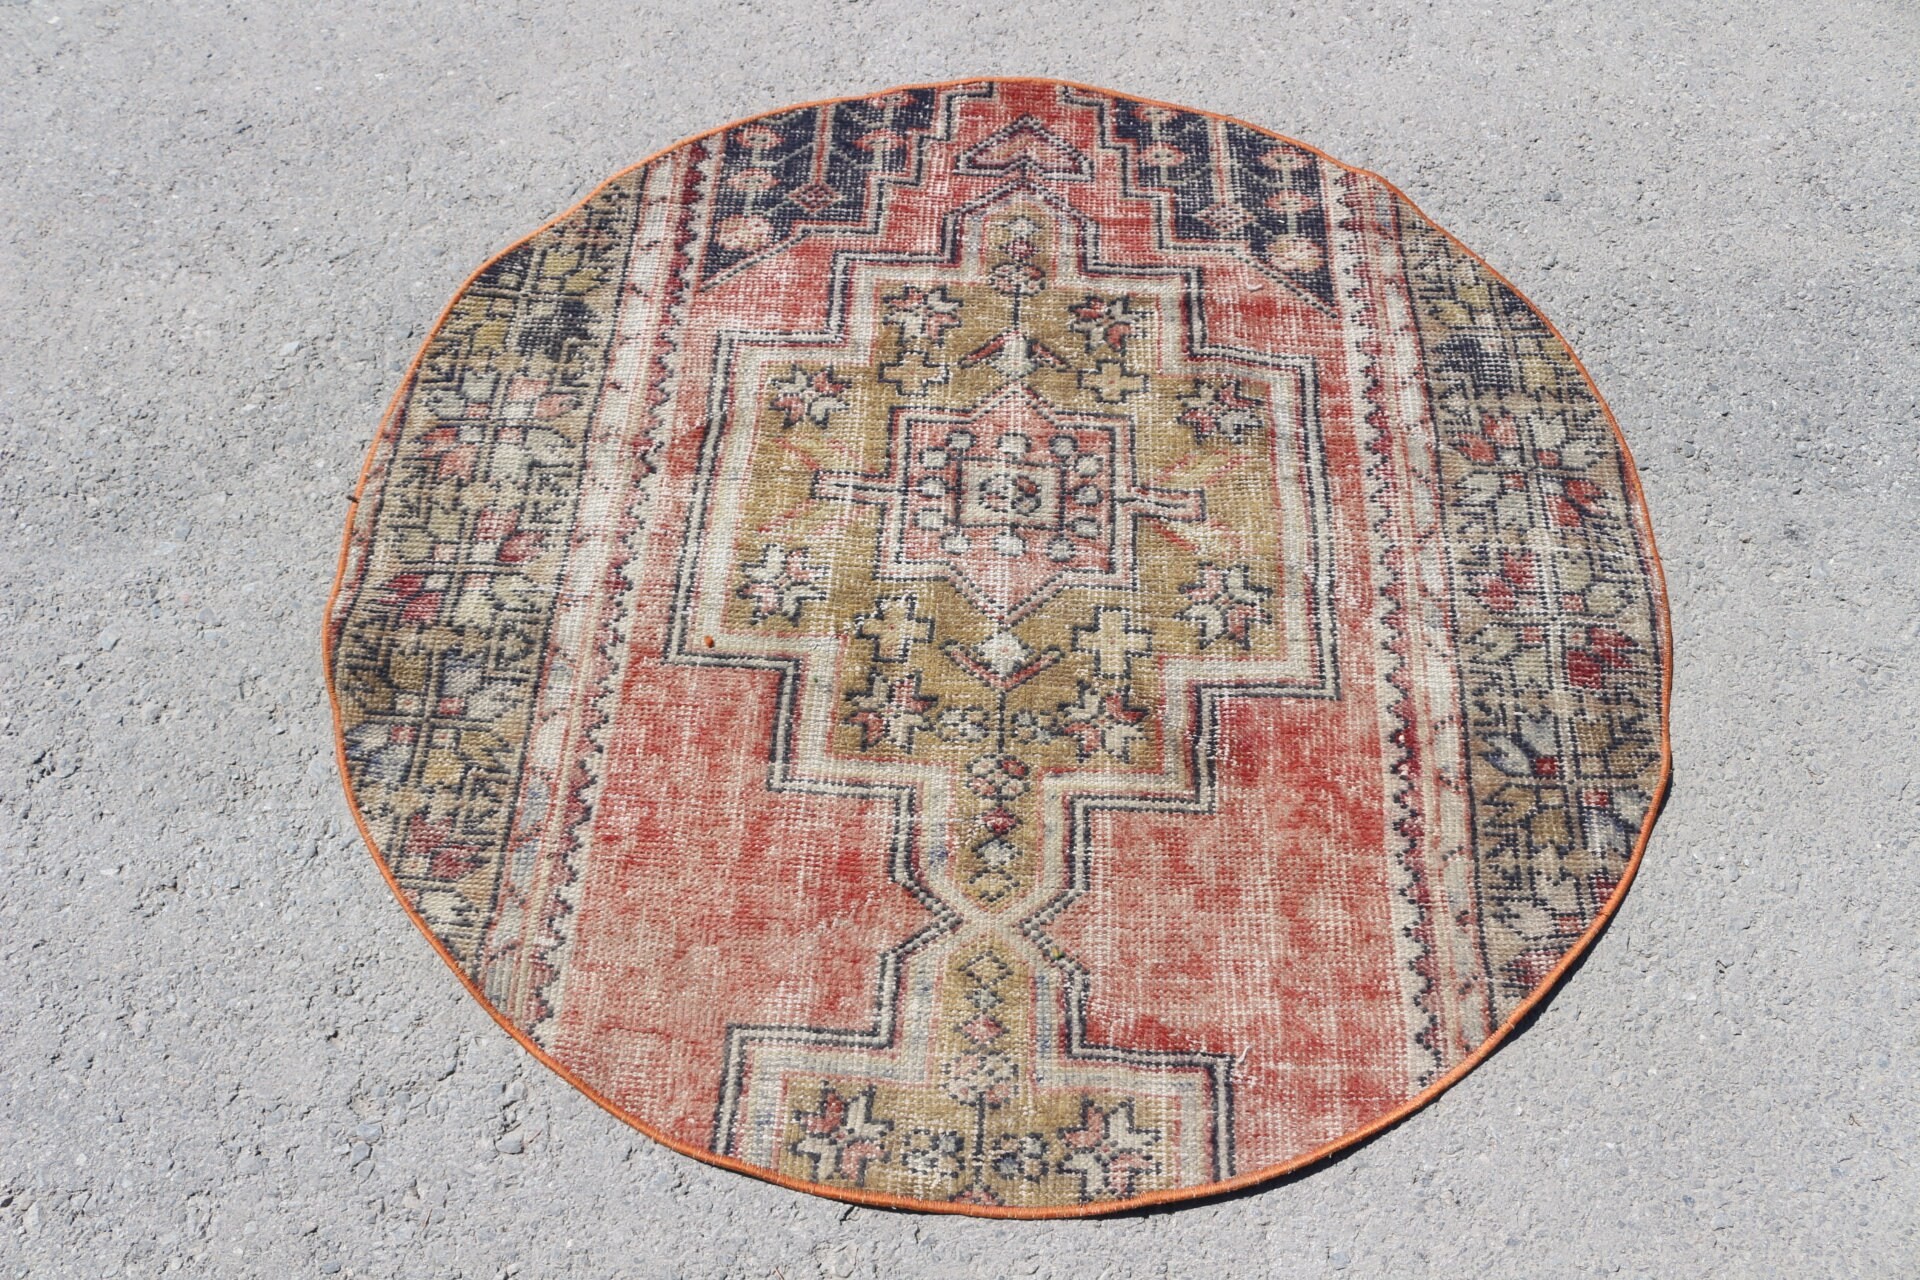 Entry Rug, Door Mat Rug, Oriental Rugs, Red Anatolian Rug, Rugs for Kitchen, Wool Rugs, Vintage Rug, Turkish Rug, 3.8x3.9 ft Small Rugs